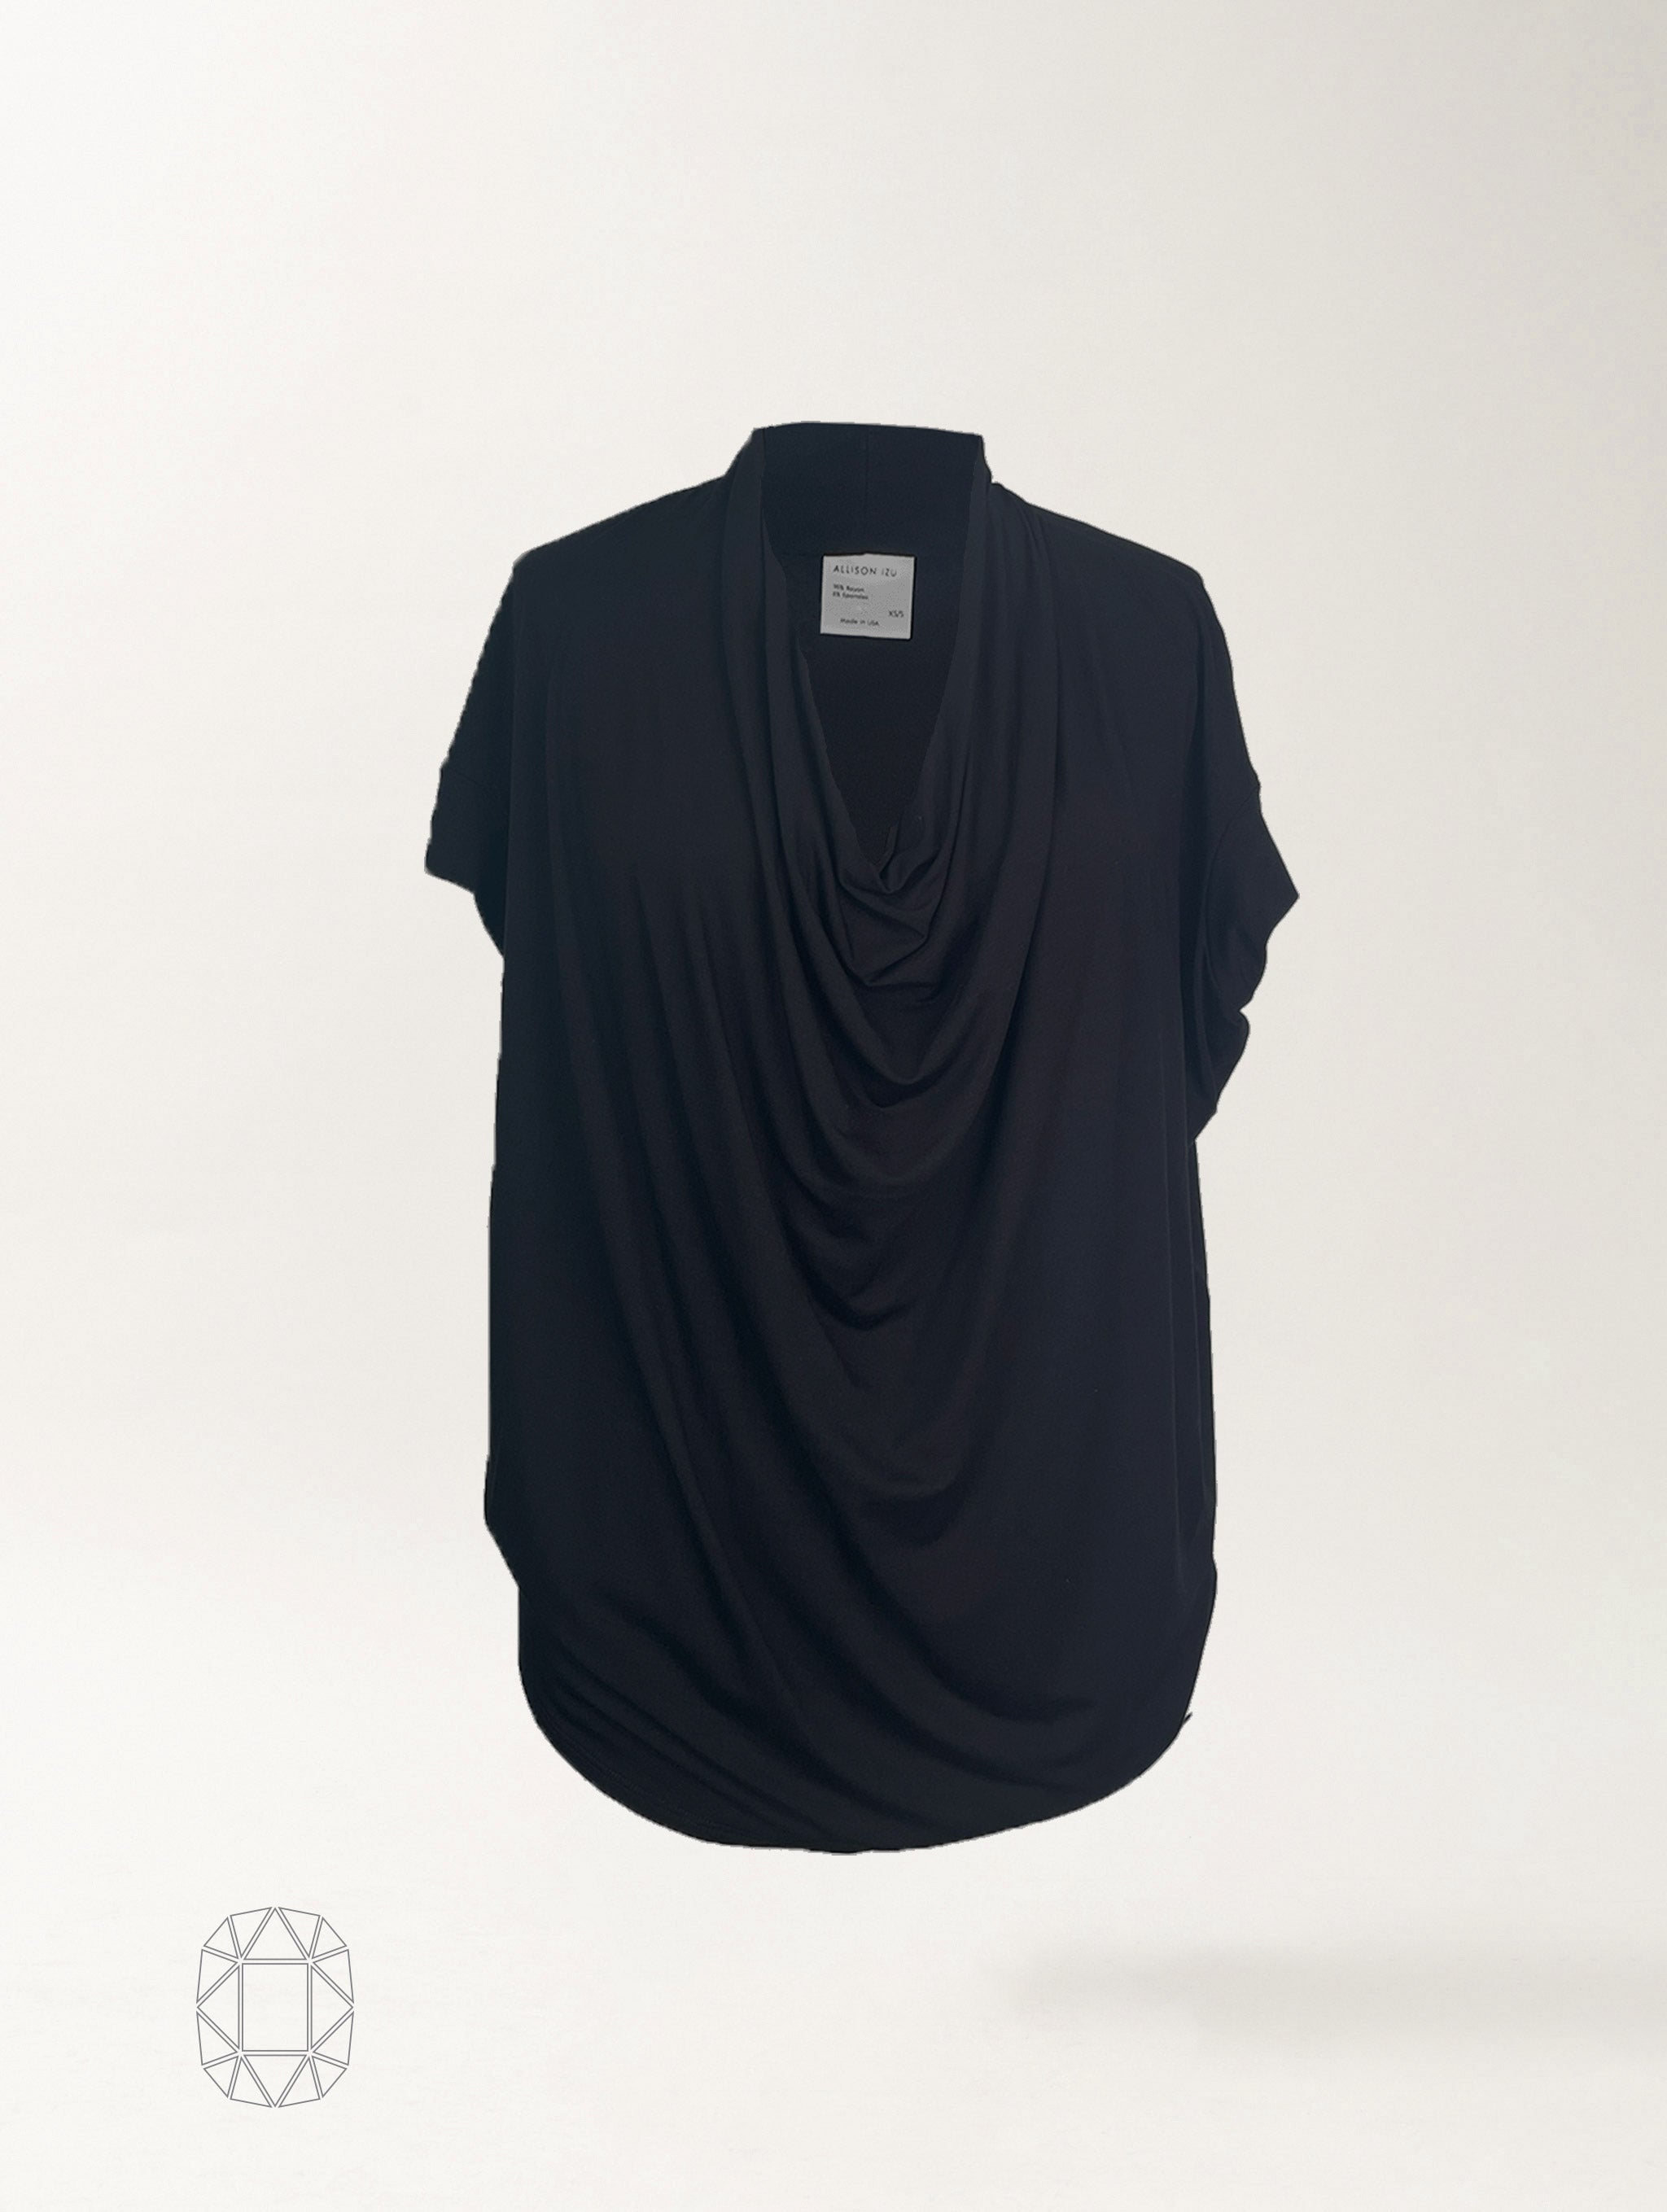 Lily Top - Black Rayon Jersey